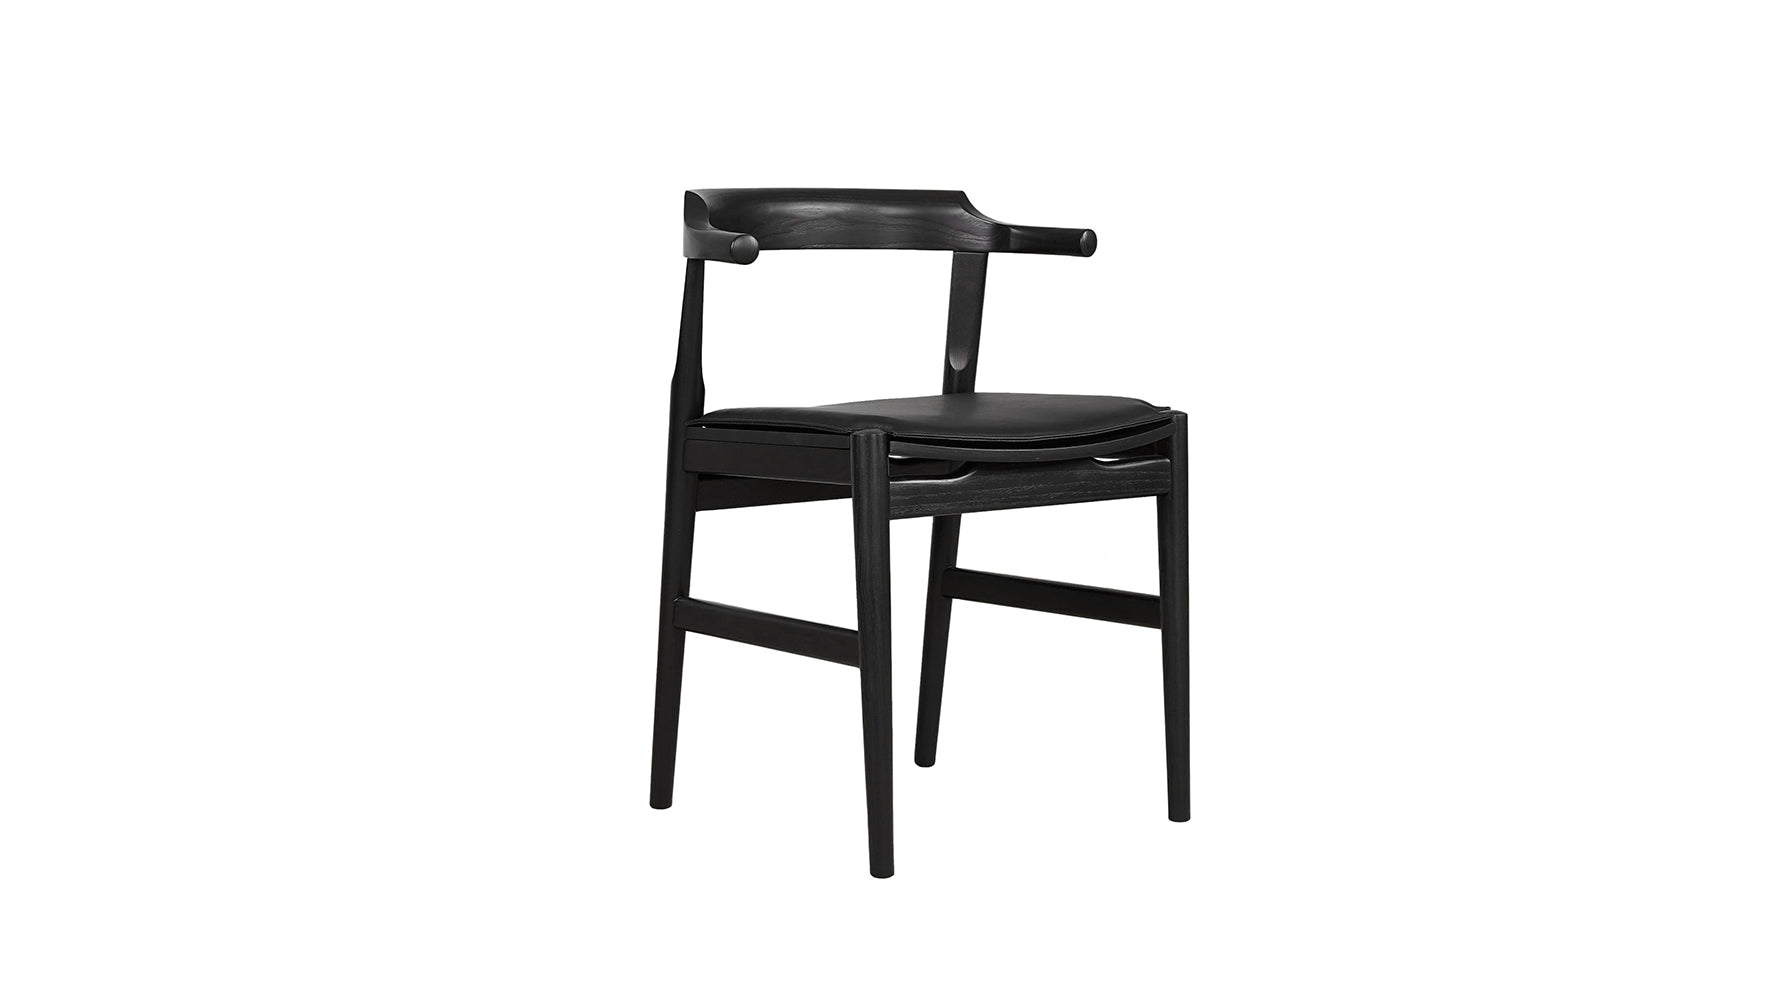 Tuck In Dining Chair with Cushion, Black Ash, Wood Seat with Black Cushion - Image 2